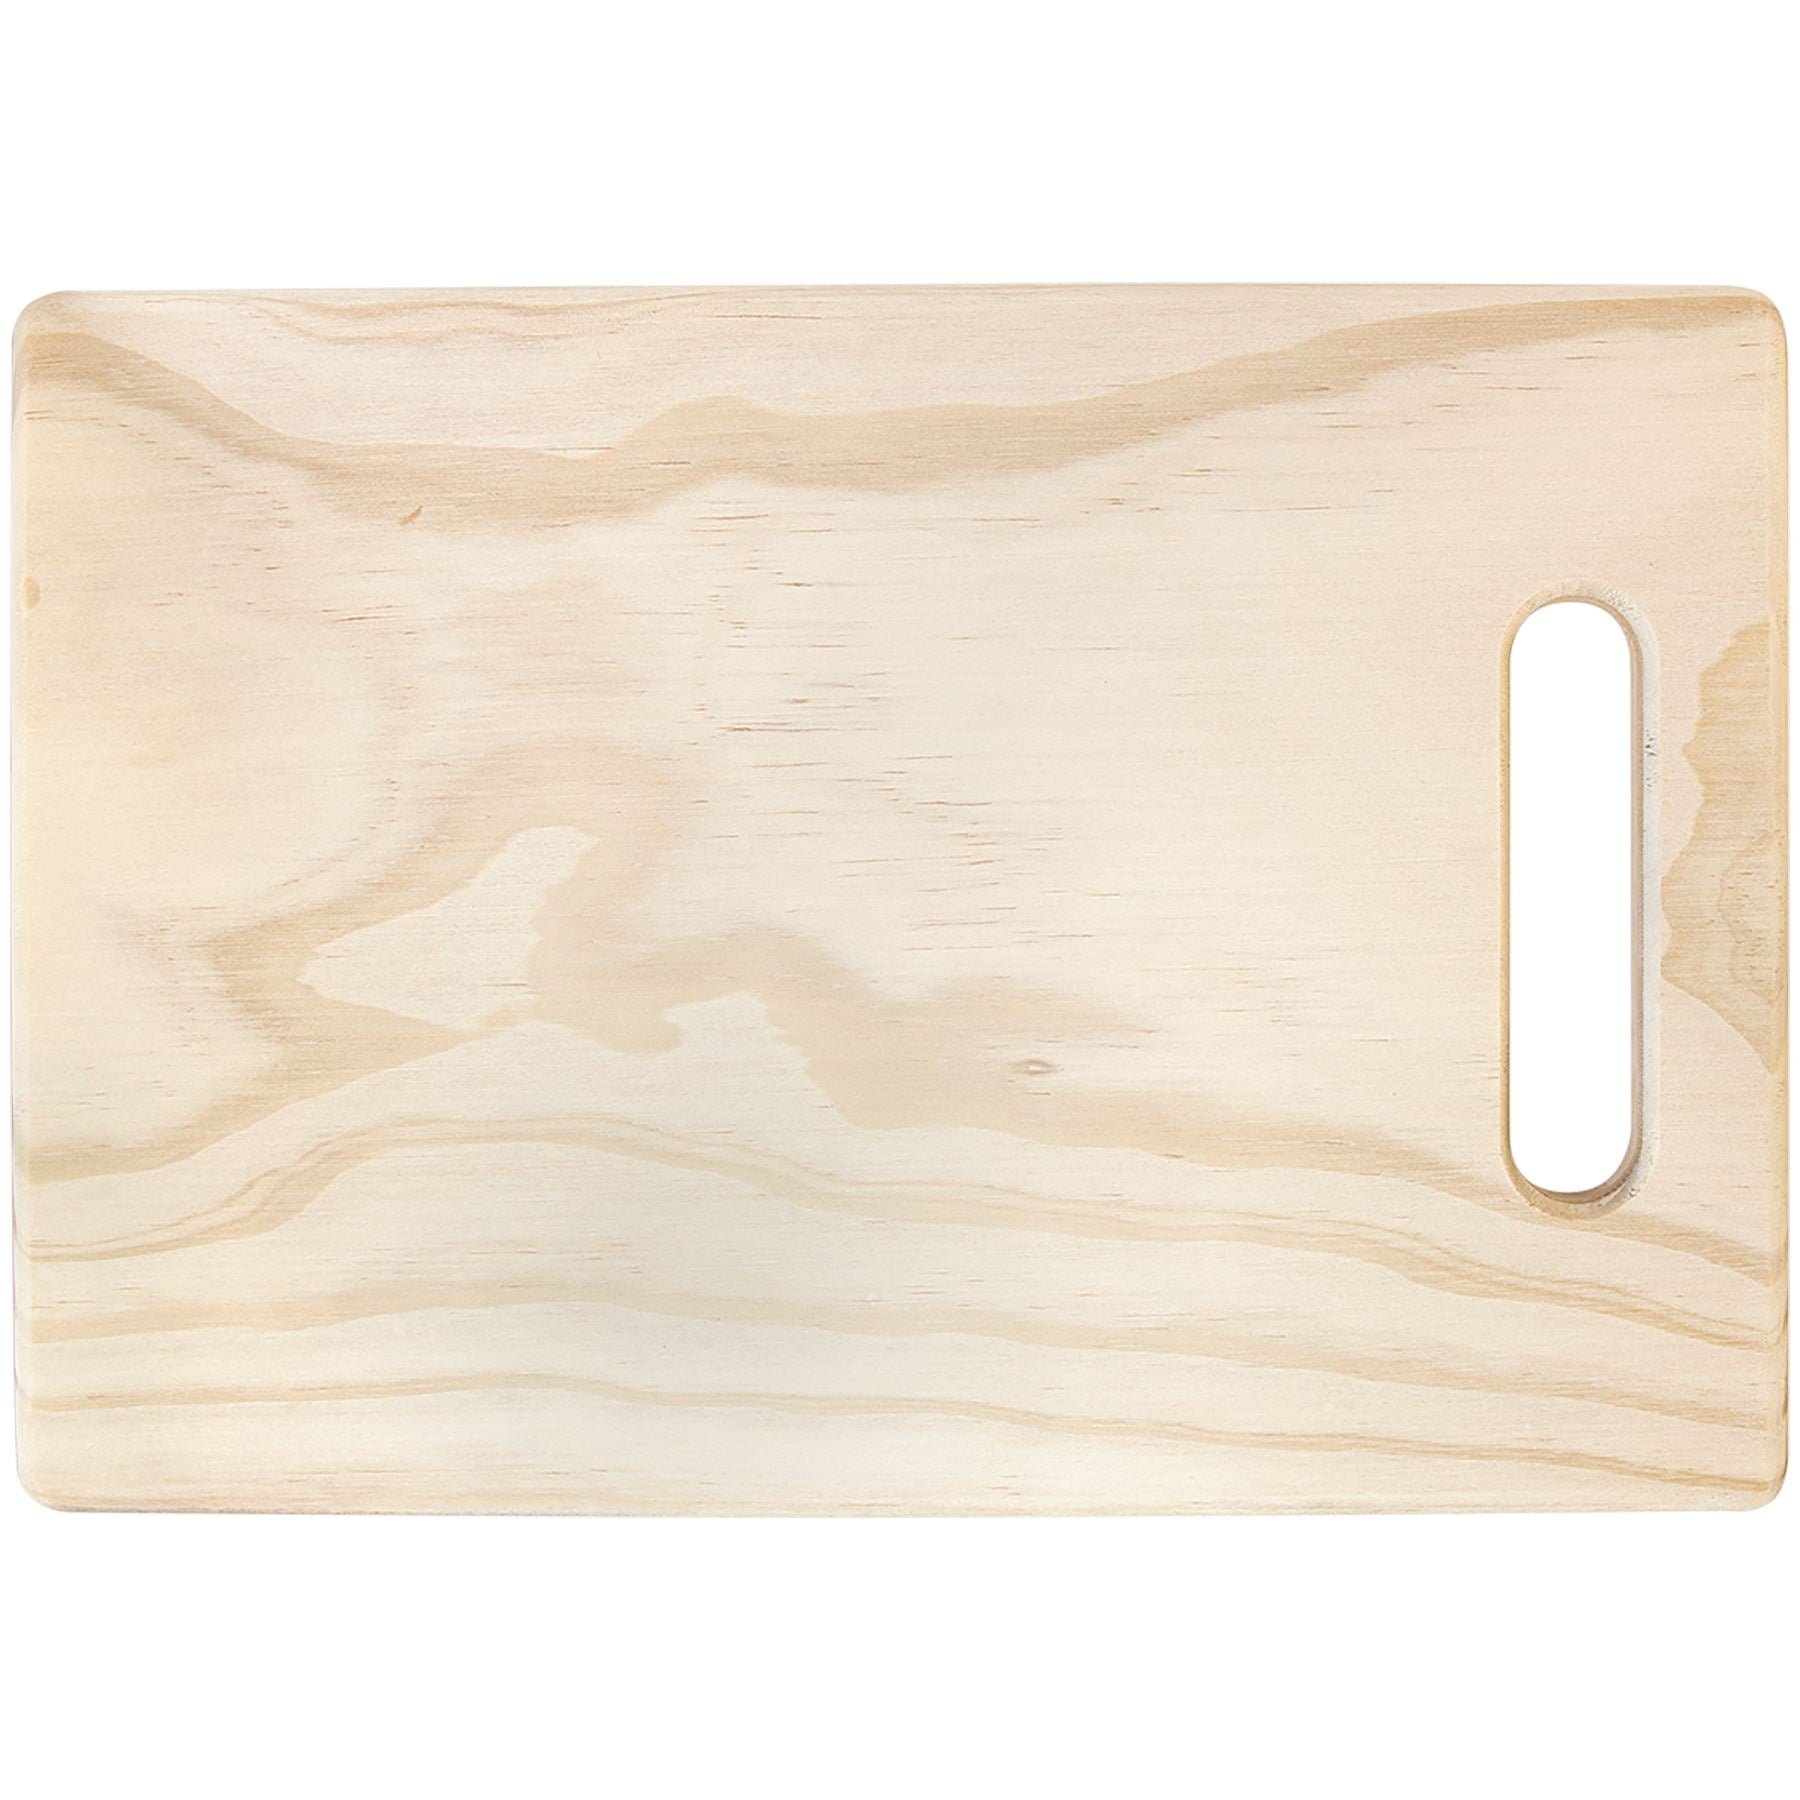 Full Color Rectangle Wood Cutting Board 11 1/4" x 7 1/2", Full Color Sub Dye/Laser Engraved Cutting Board Craftworks NW 